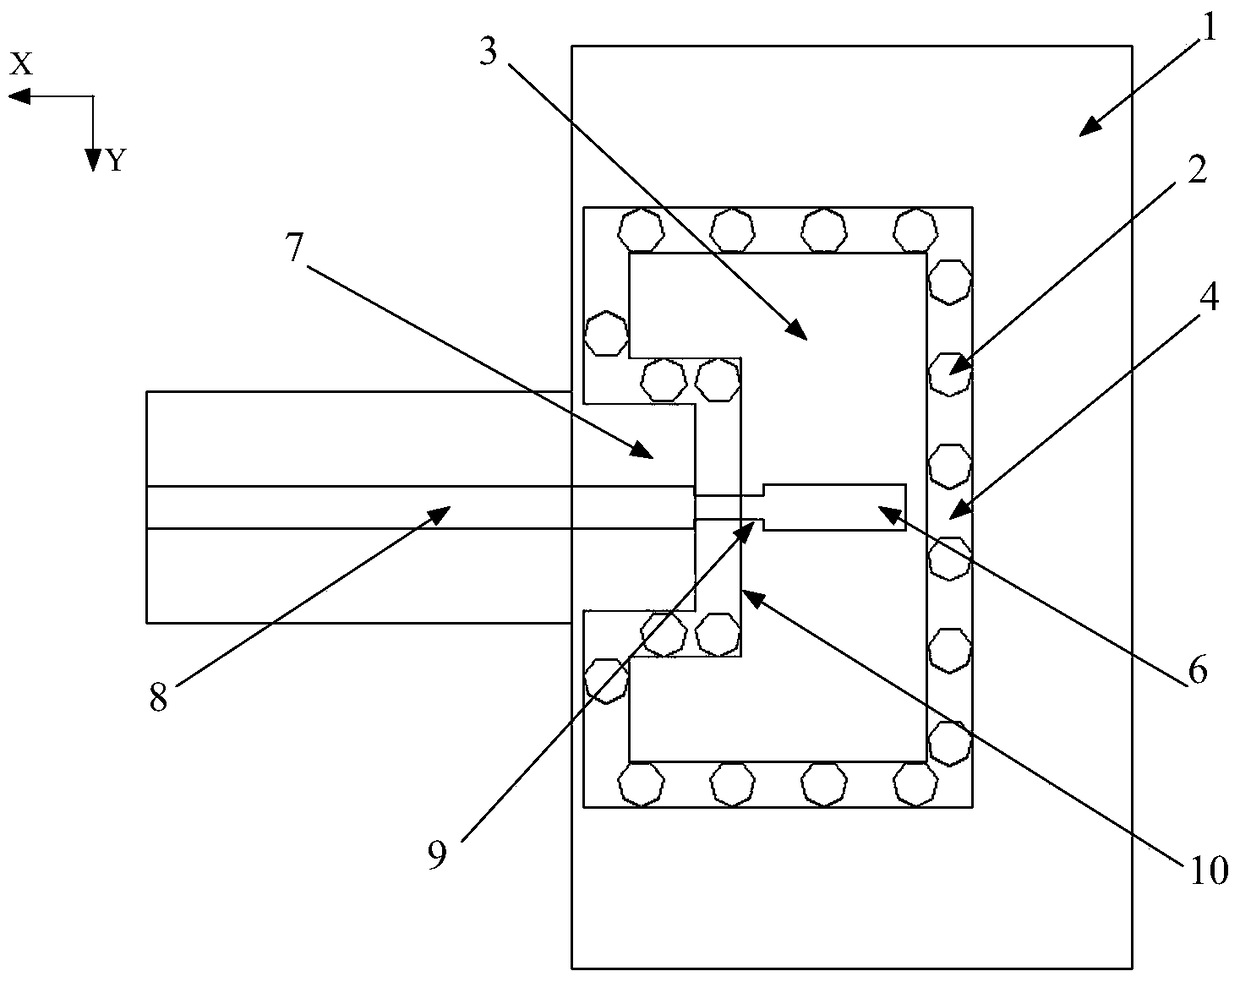 Vertical interconnection circuit structure between substrate-integrated ridge waveguide plates